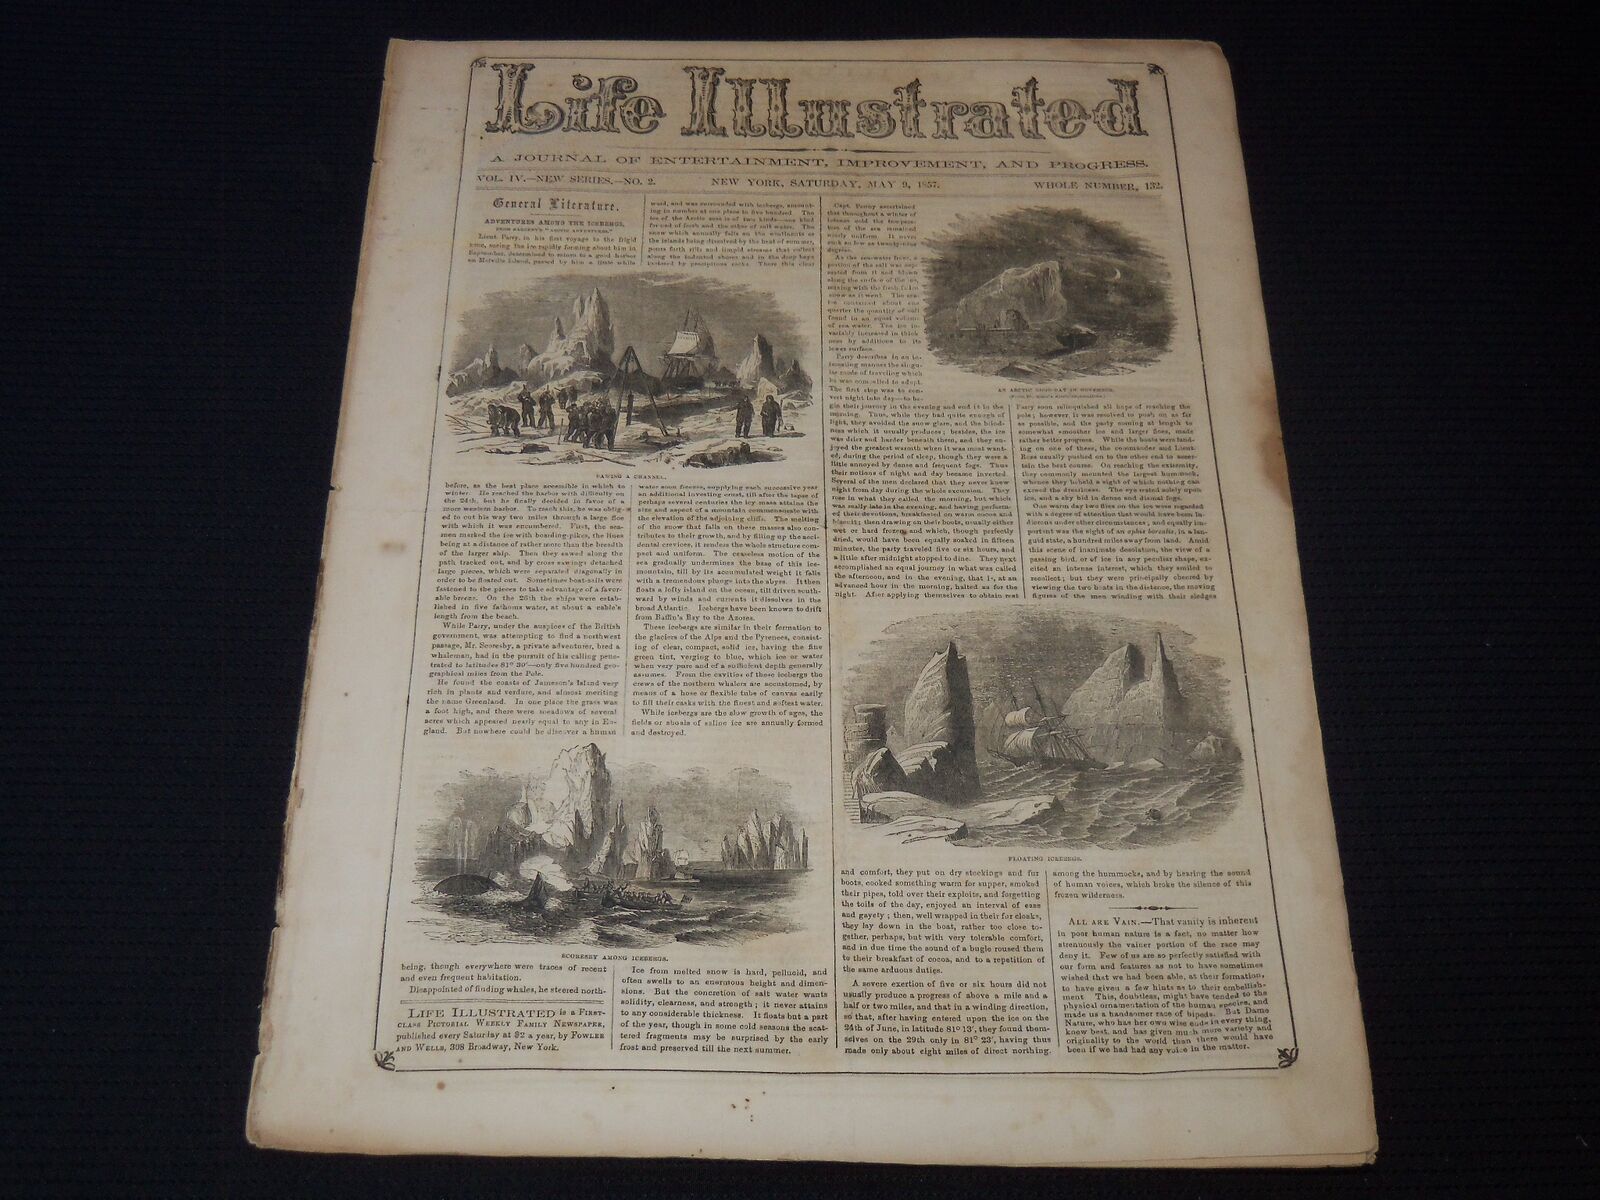 1857 MAY 9 LIFE ILLUSTRATED NEWSPAPER - ADVENTURES AMONG THE ICEBERGS - NP 5930